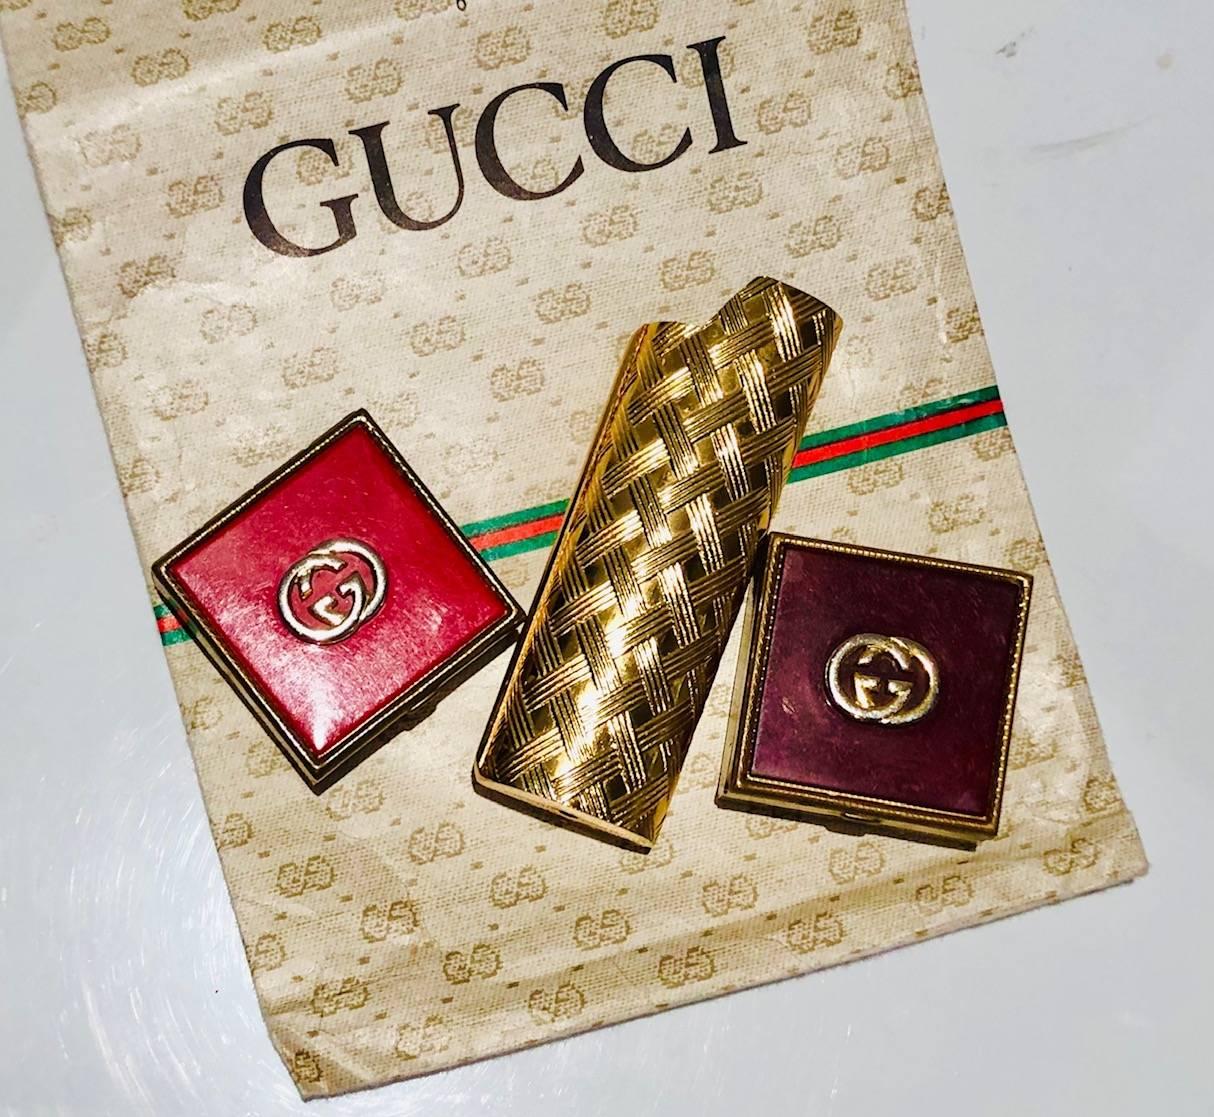 1980s GUCCI Logo Square Lidded Red and Gold Tone Metal Pocket Ashtray Pill box  3